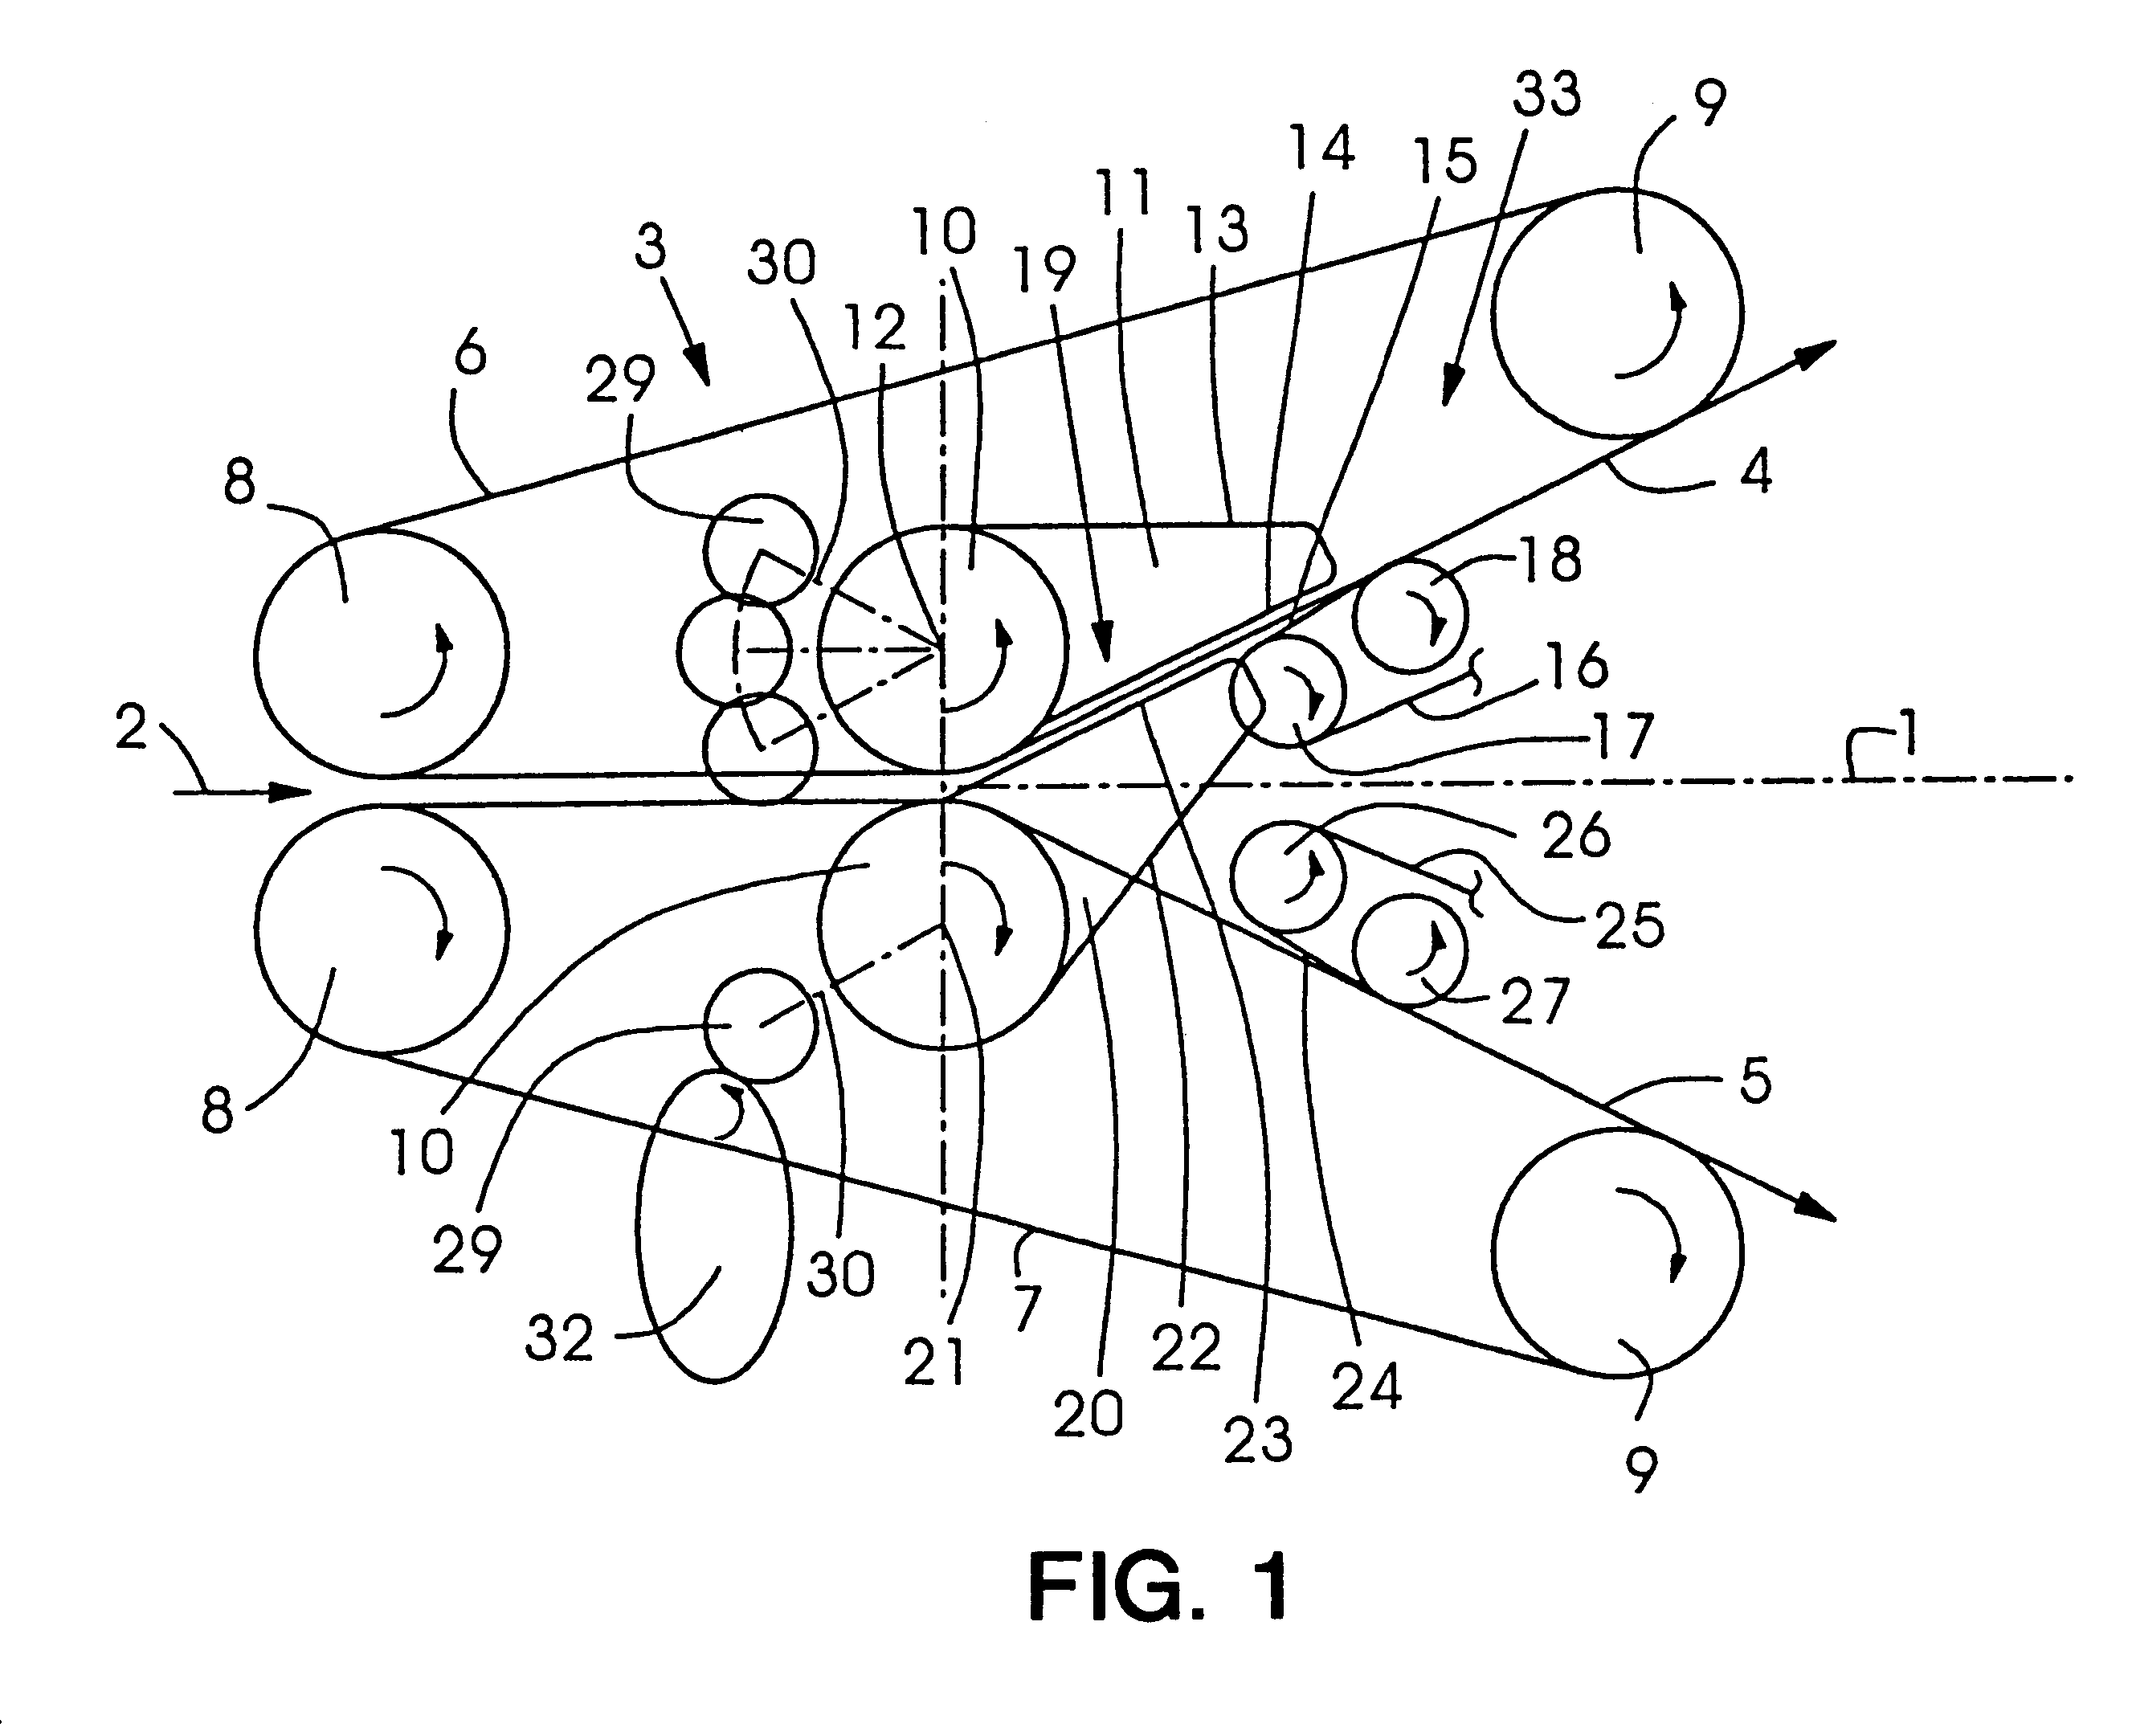 Apparatus for diverting a continuous stream of flat products to alternate paths